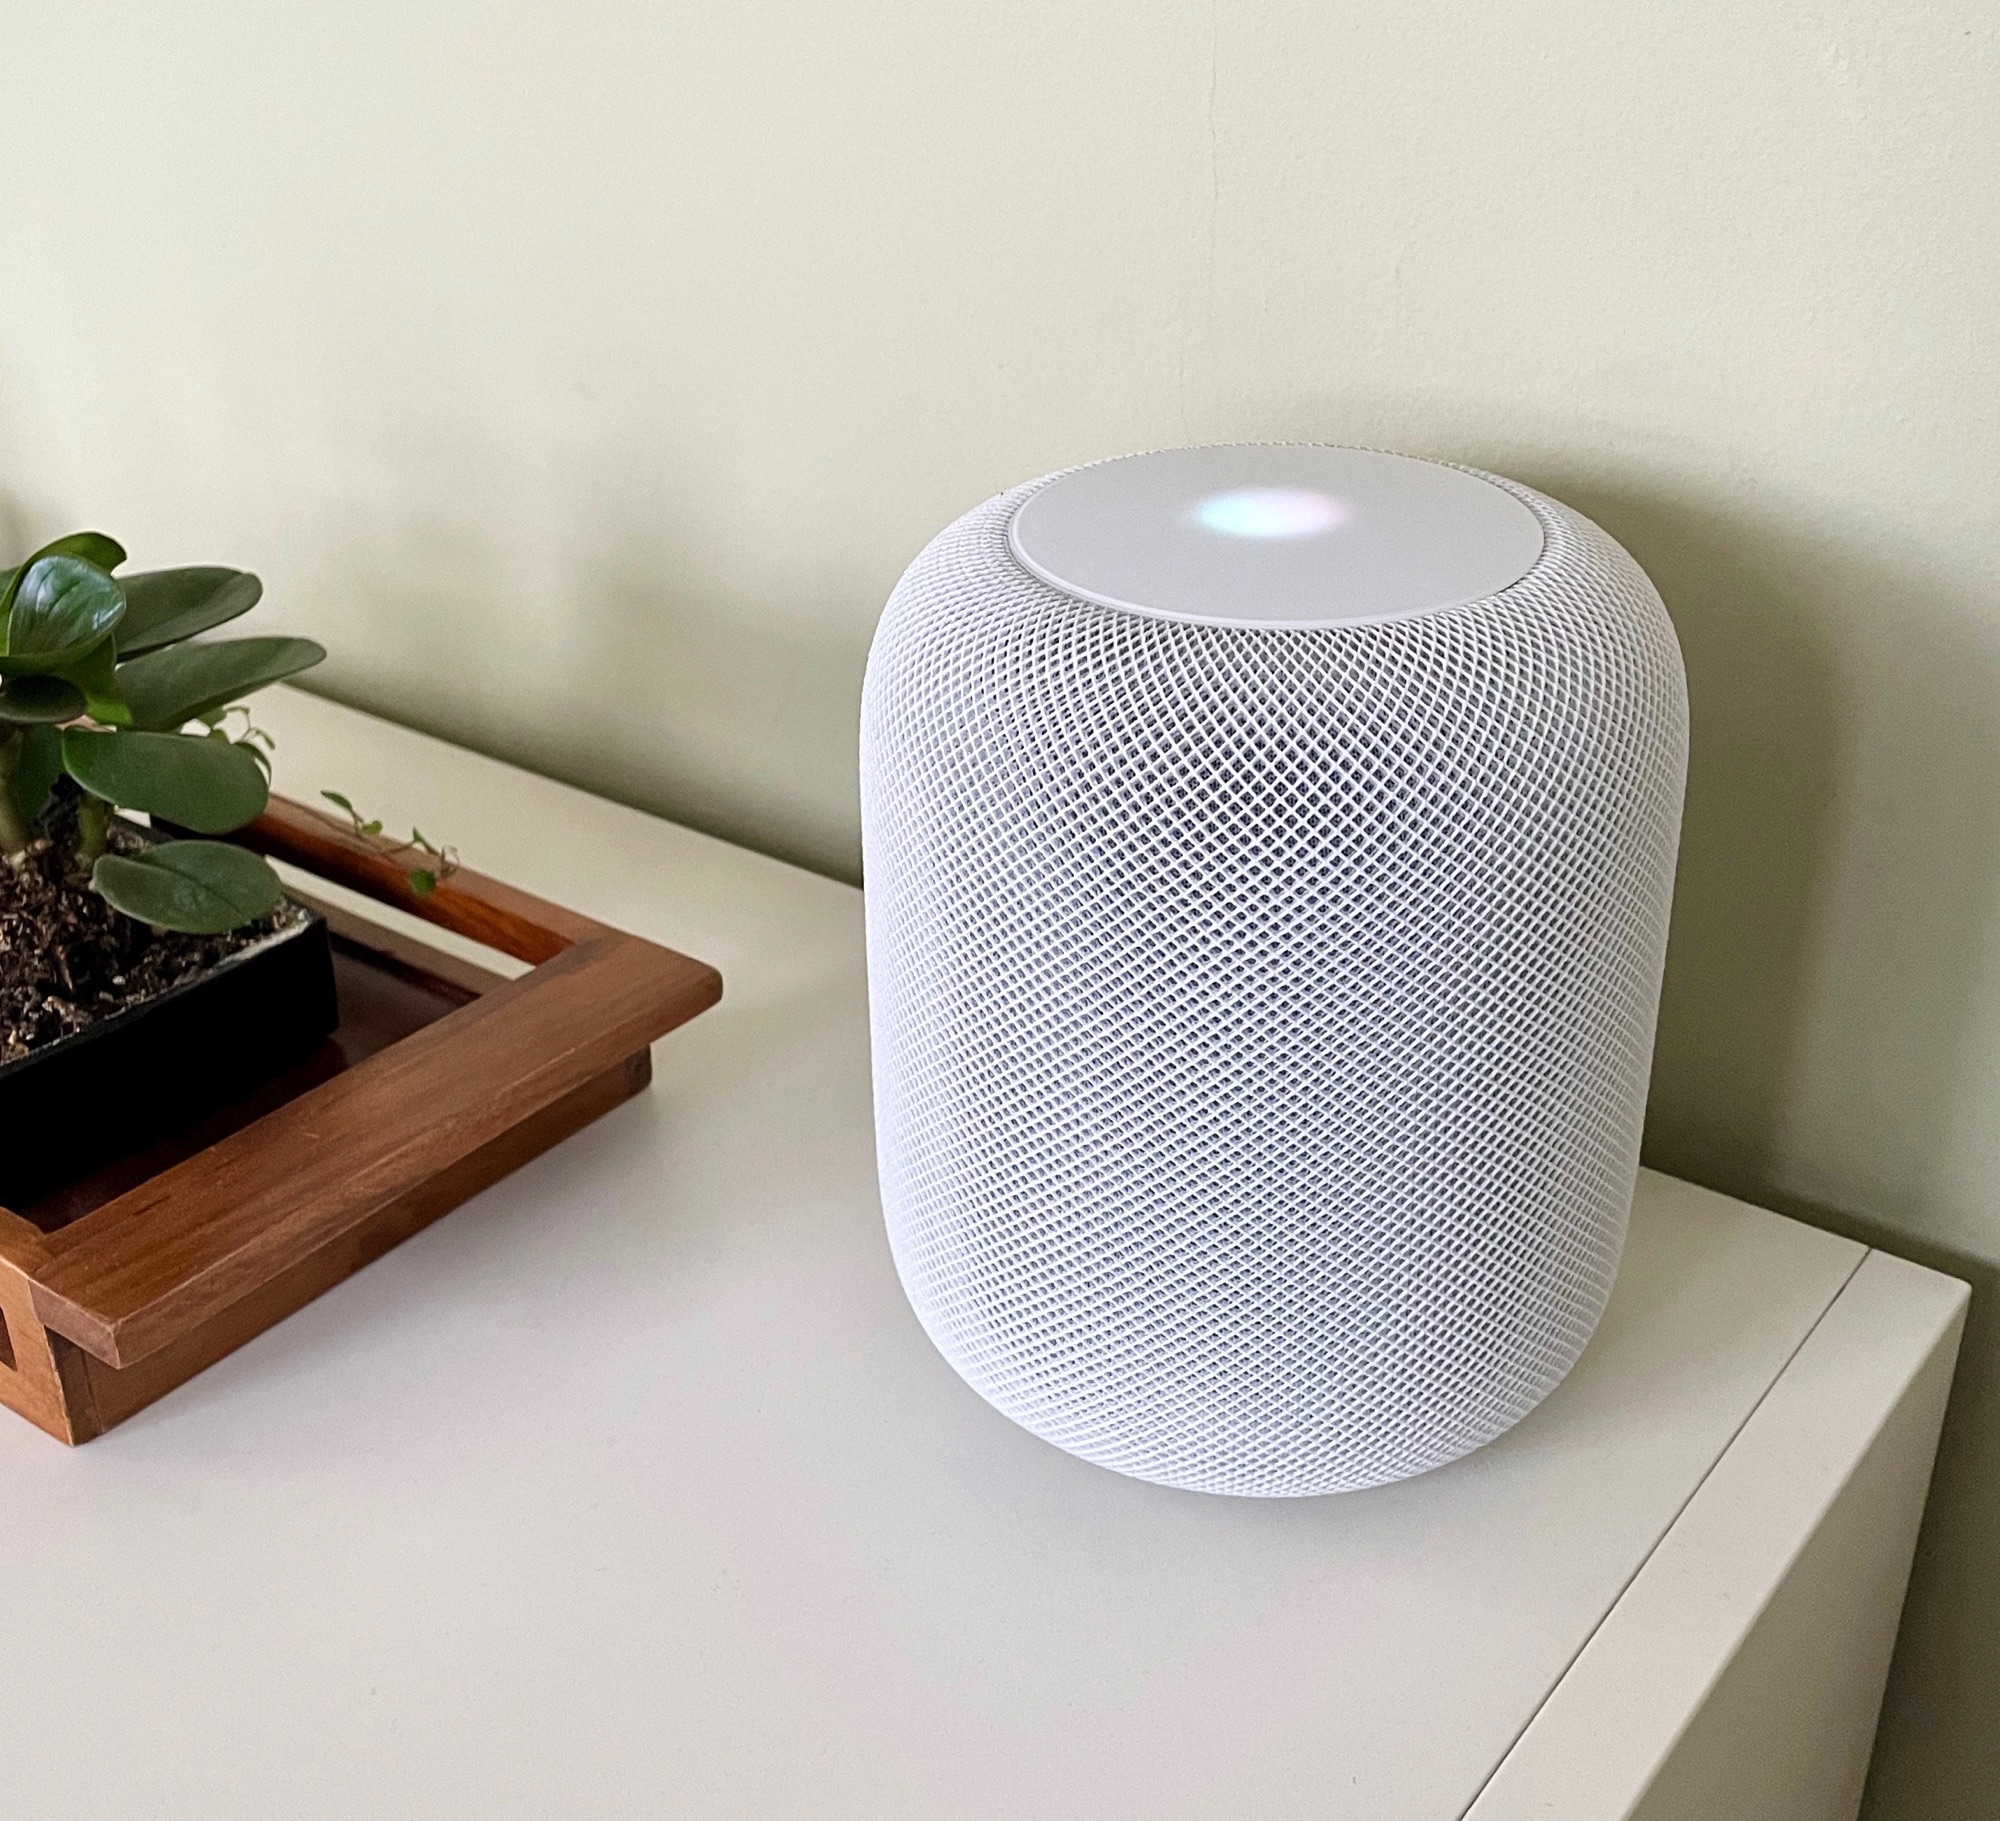 HomePod causes problems, short news and more in our weekly roundup